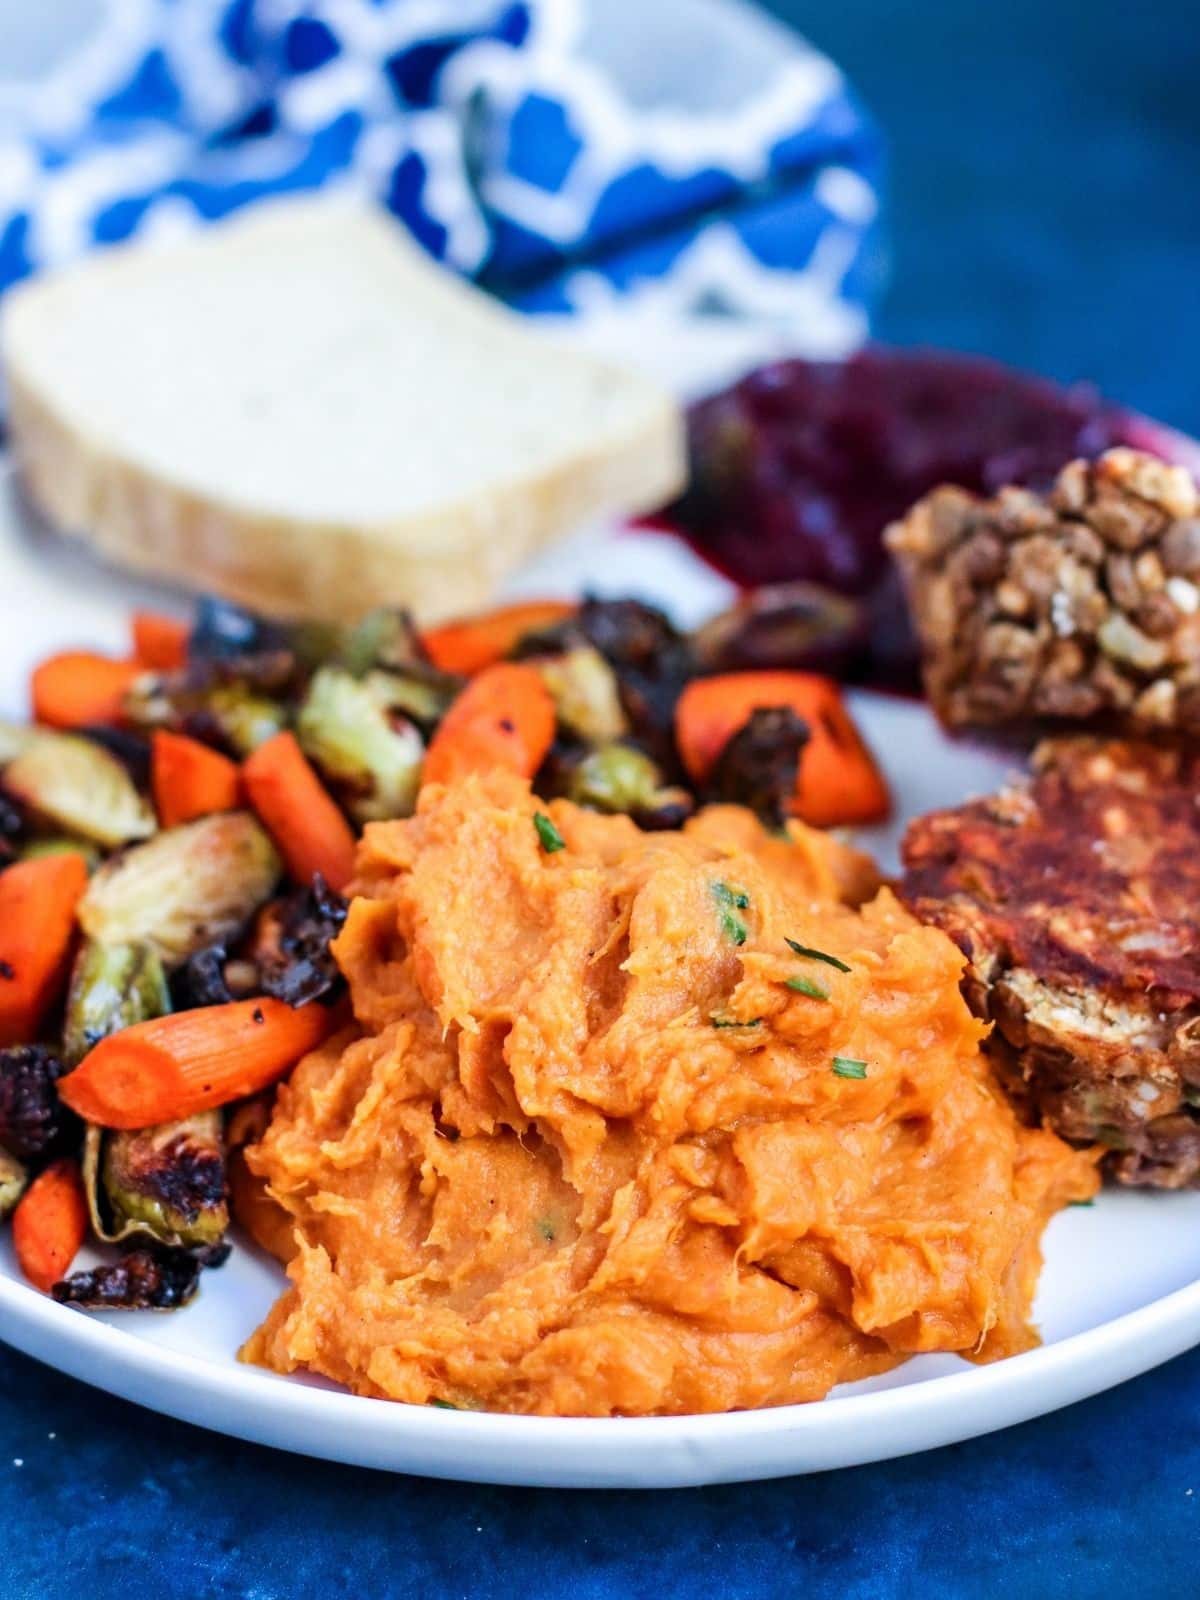 Dinner plate with mashed sweet potatoes, roasted vegetables, bread, cranberry sauce, and lentil meatloaf.